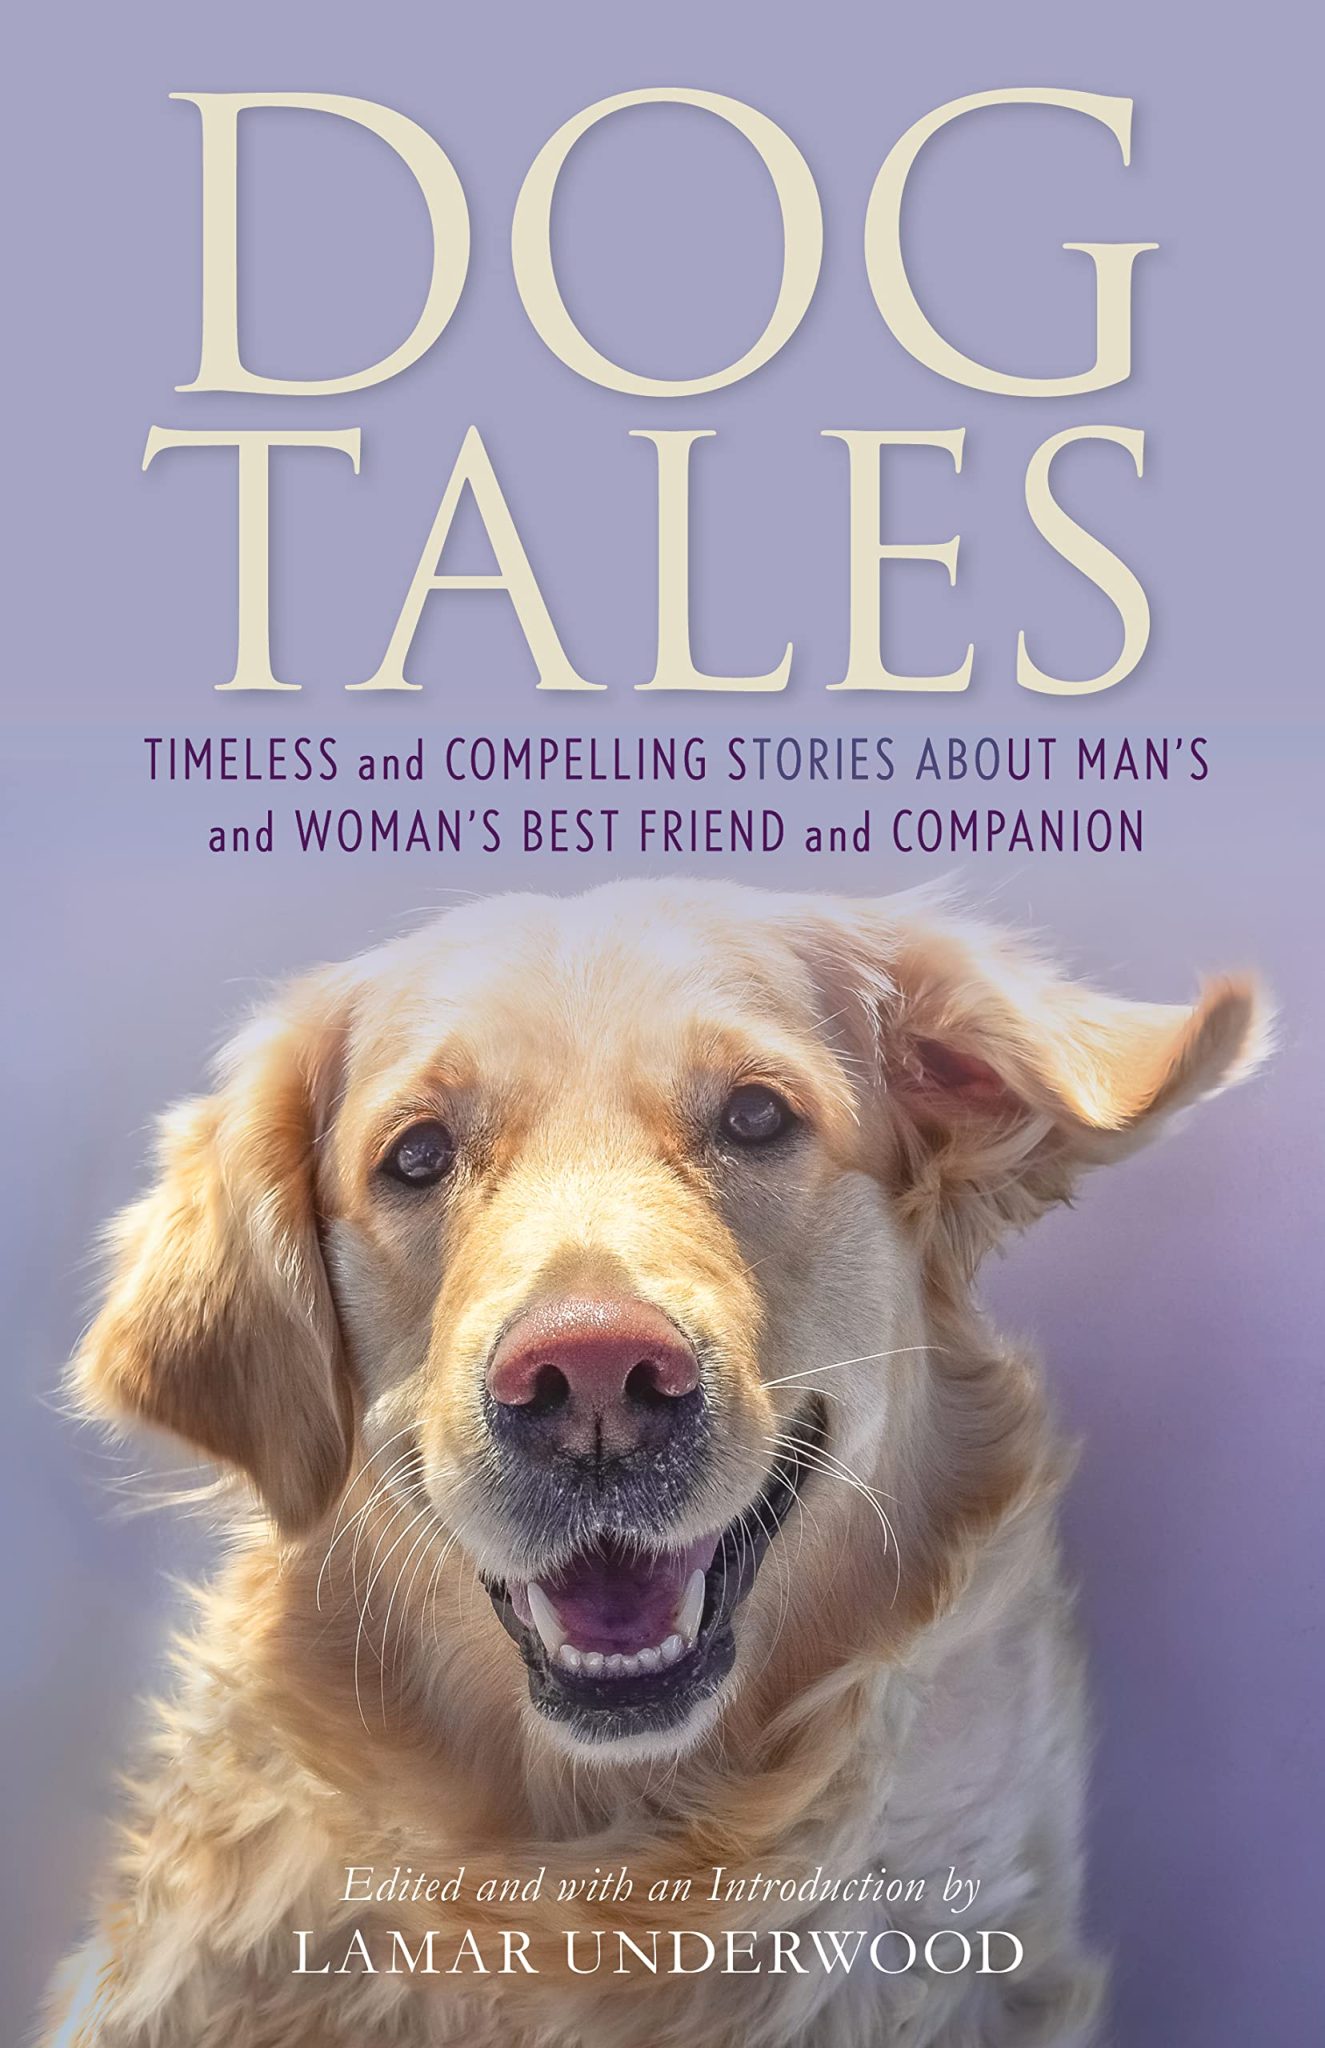 Dog Tales: Timeless and Compelling Stories about Man's and Woman's Best Friend and Companion